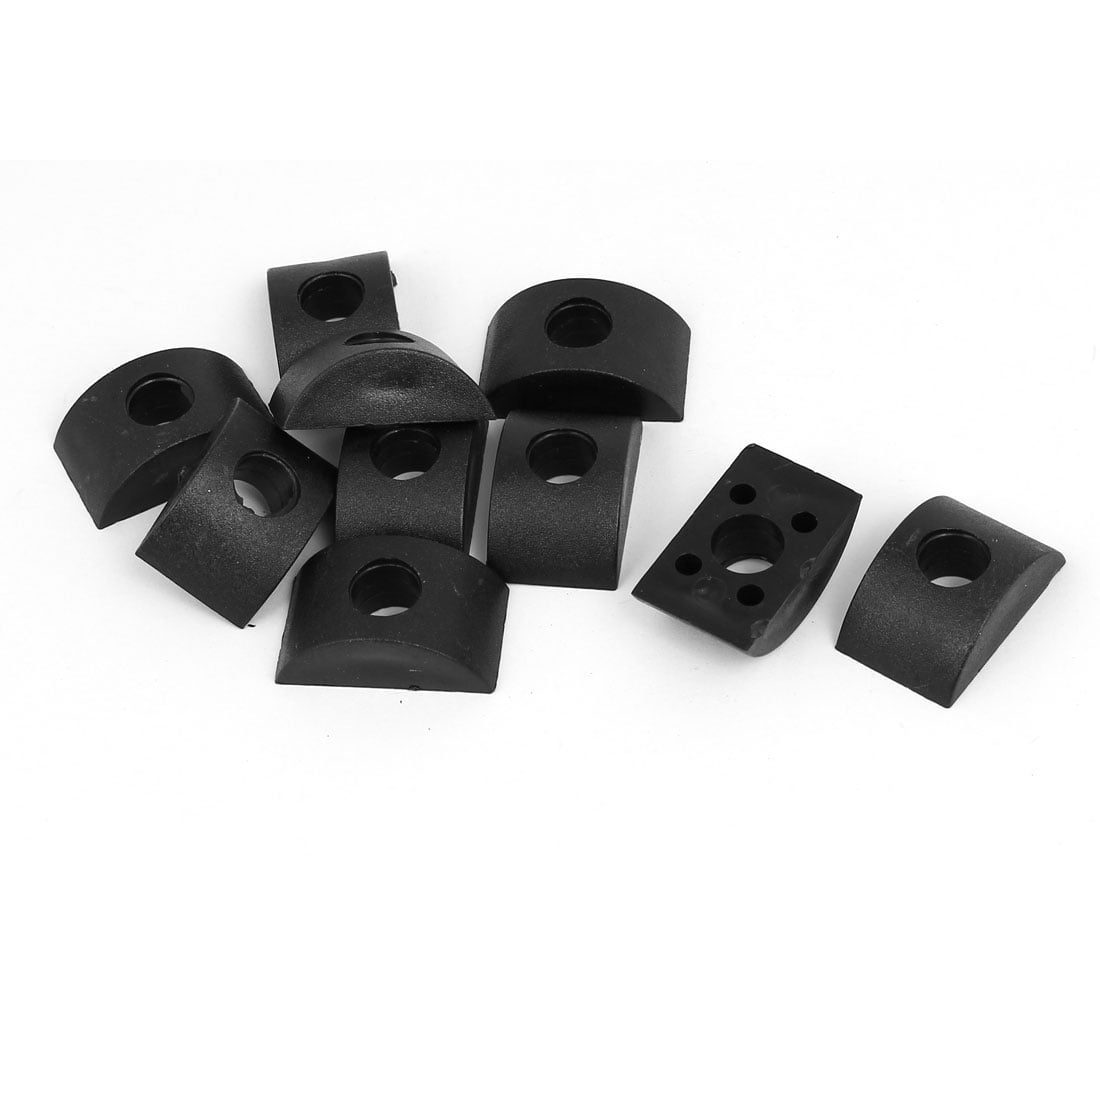 uxcell 8mm Hole Dia Furniture Connector Half Moon Nuts Spacer Washer Black 20PCS a16111800ux0931